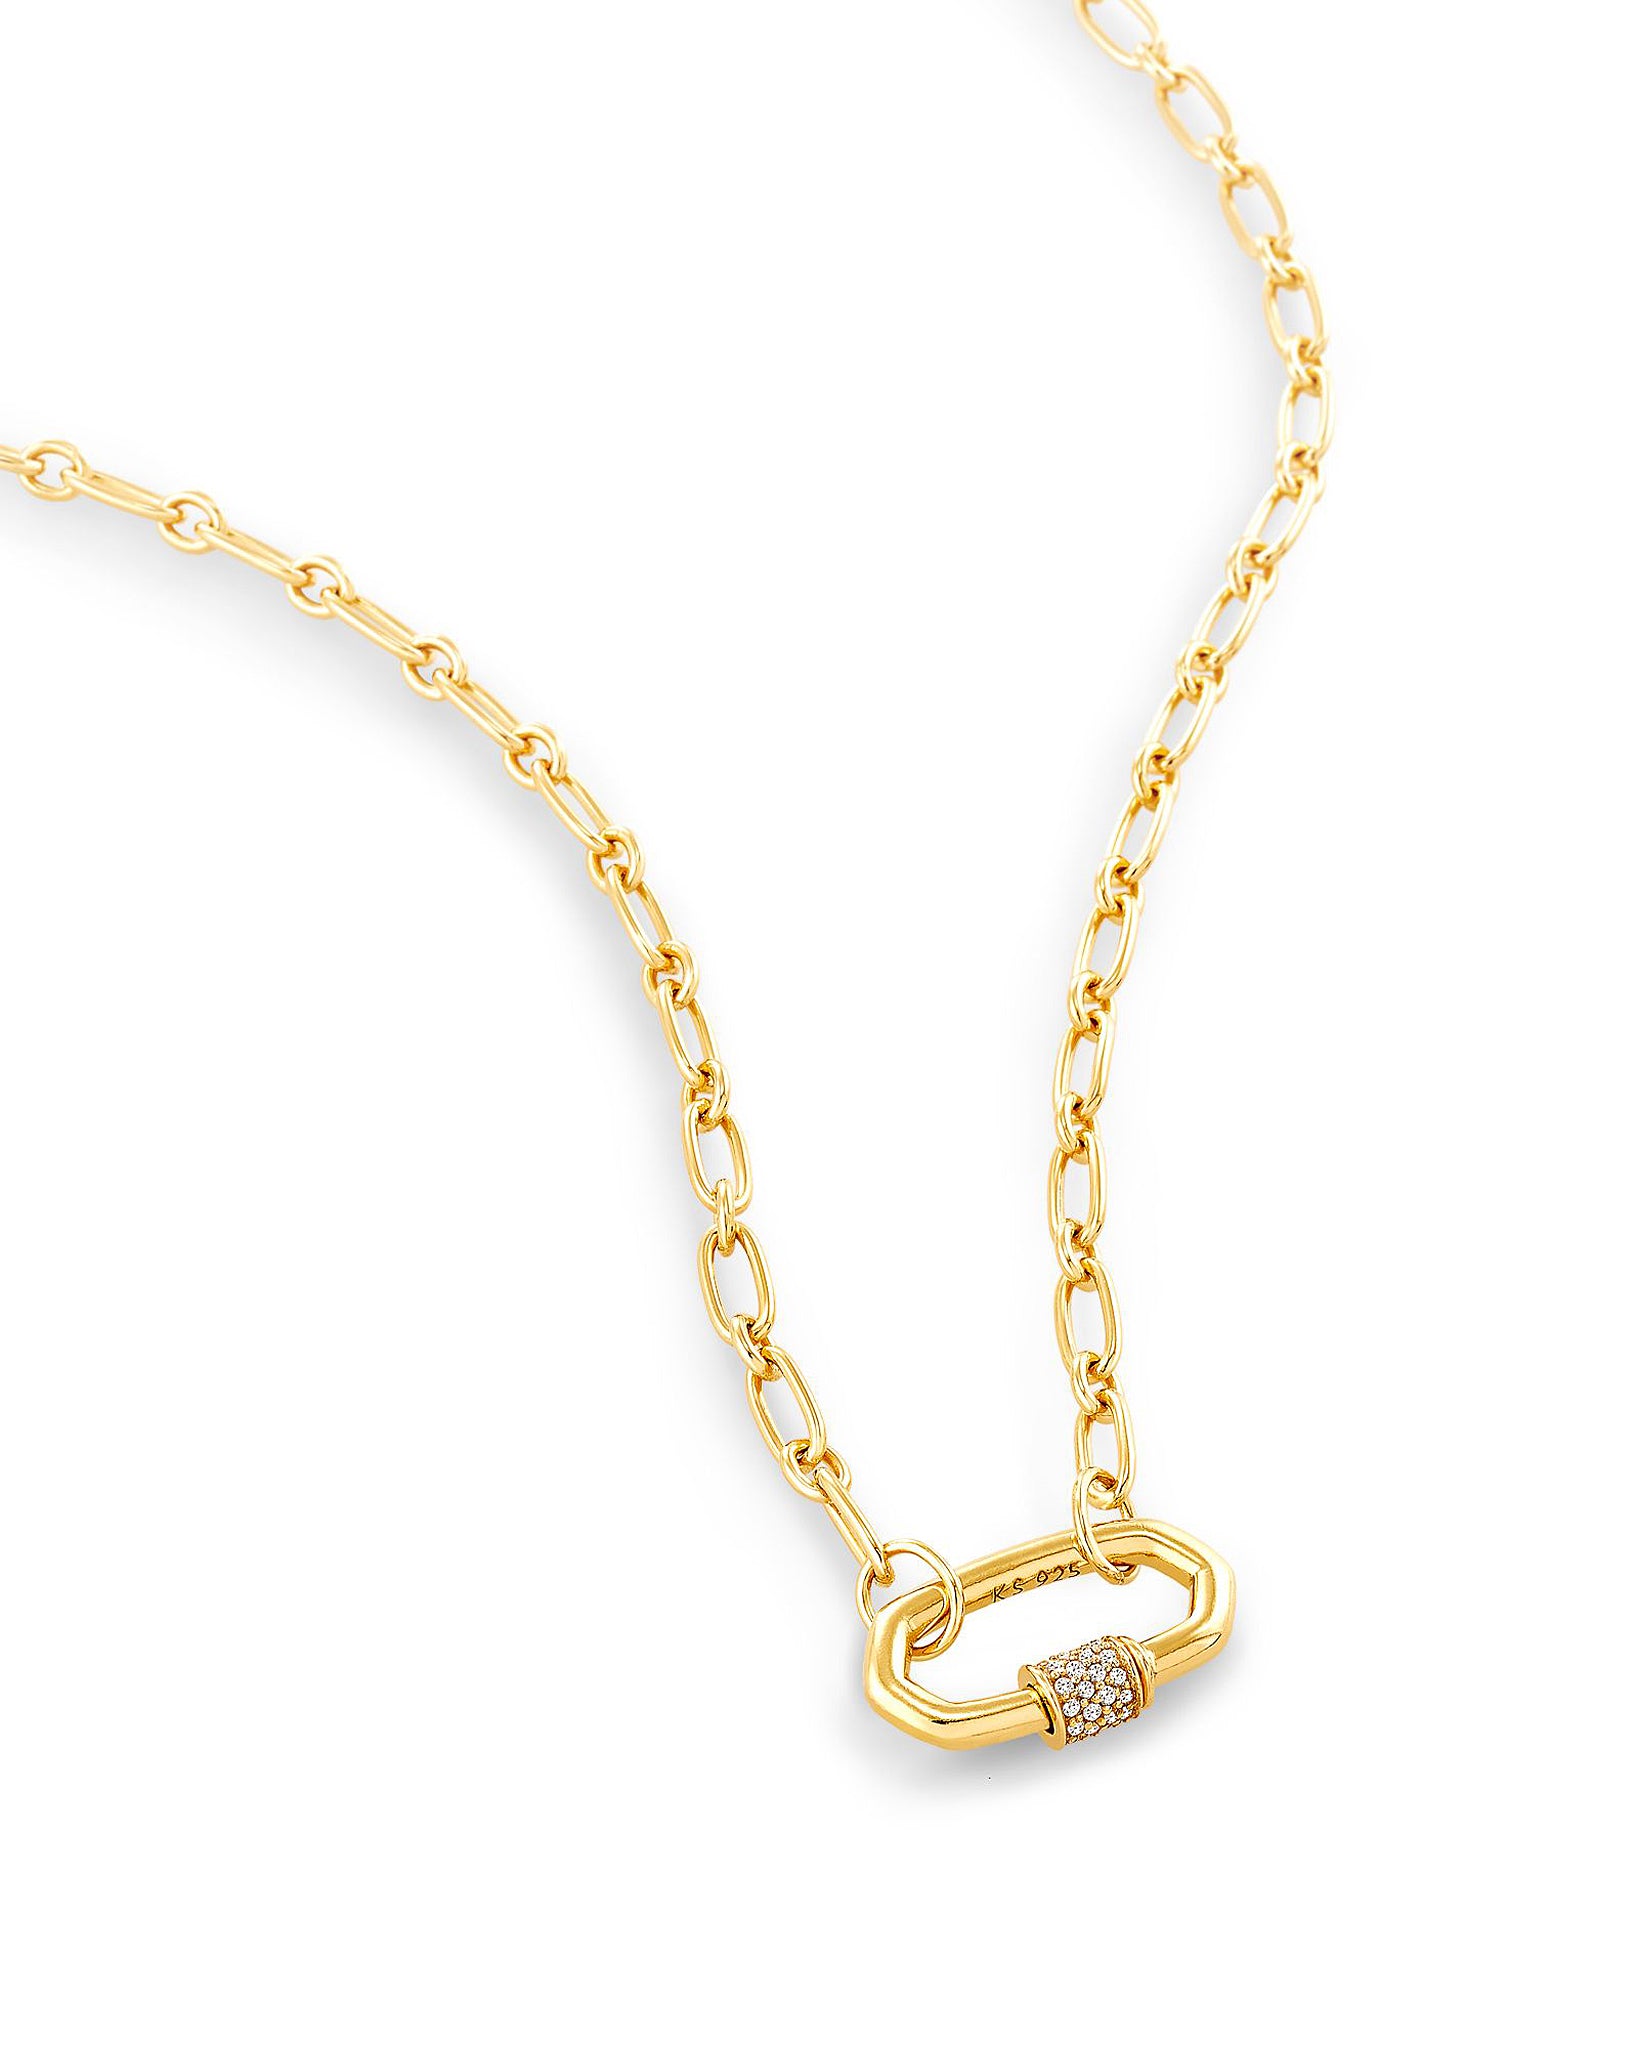 Kendra Scott Bristol Chain Link Necklace in White Sapphire and 18k Gold Vermeil